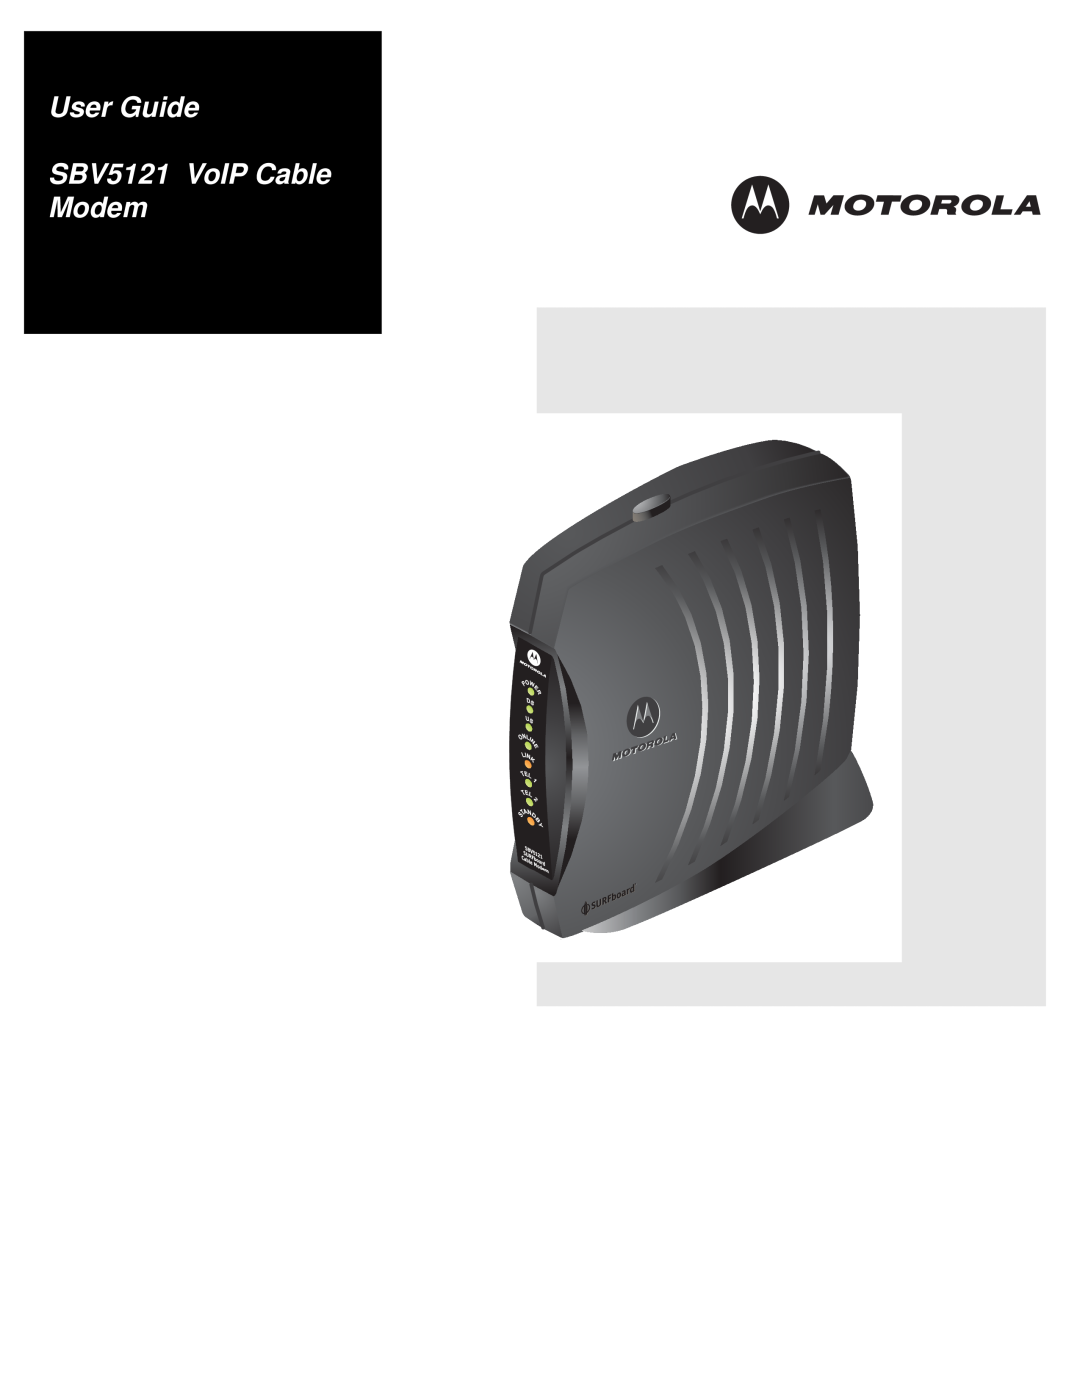 Nikon manual User Guide SBV5121 VoIP Cable Modem 